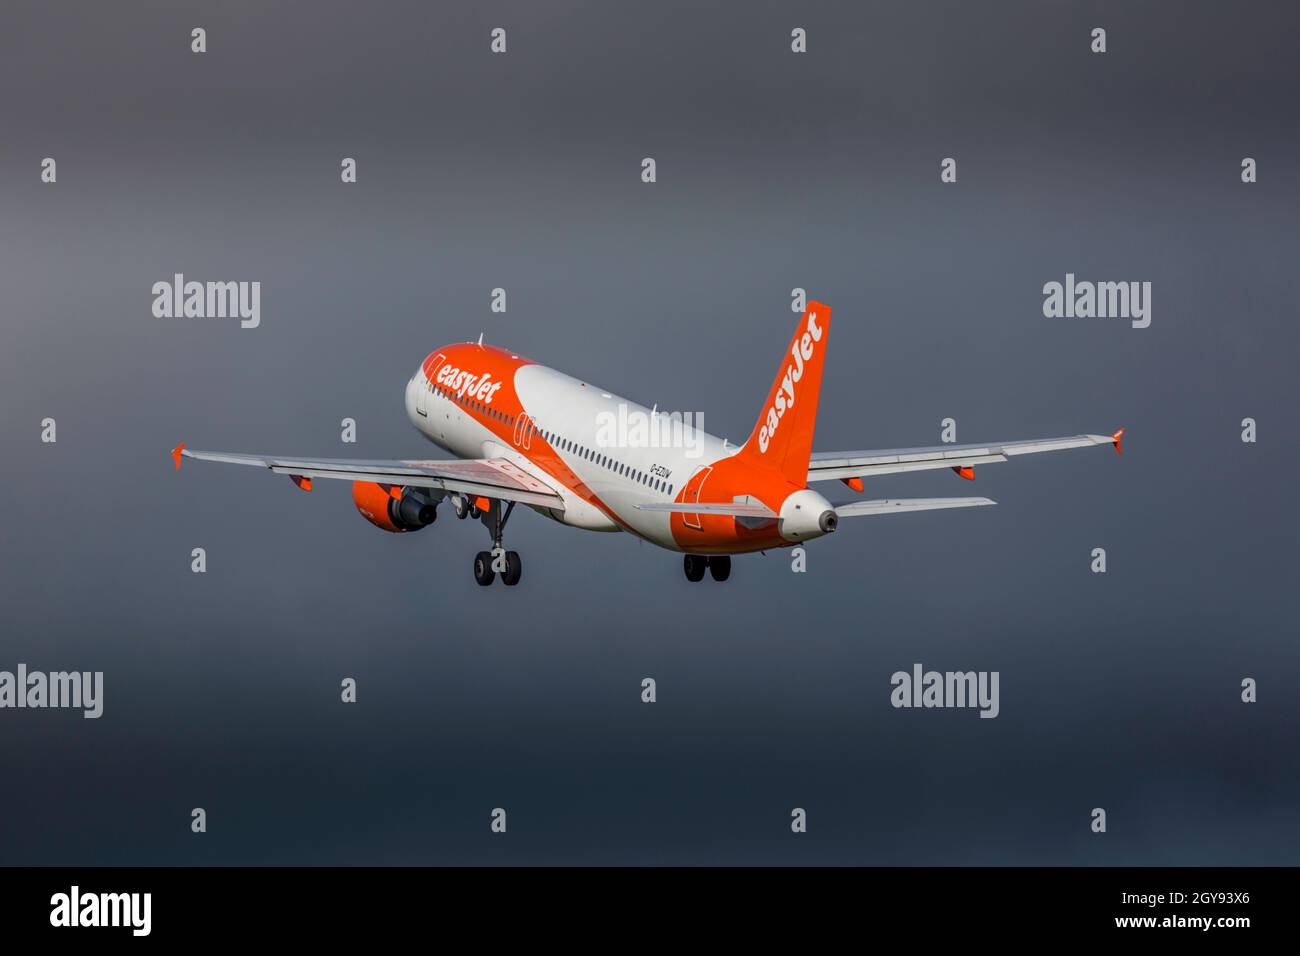 Easyjet Airbus A320-200 Airliner, G-EZUW, taking off from Bristol Lulsgate Airport, England. Stock Photo